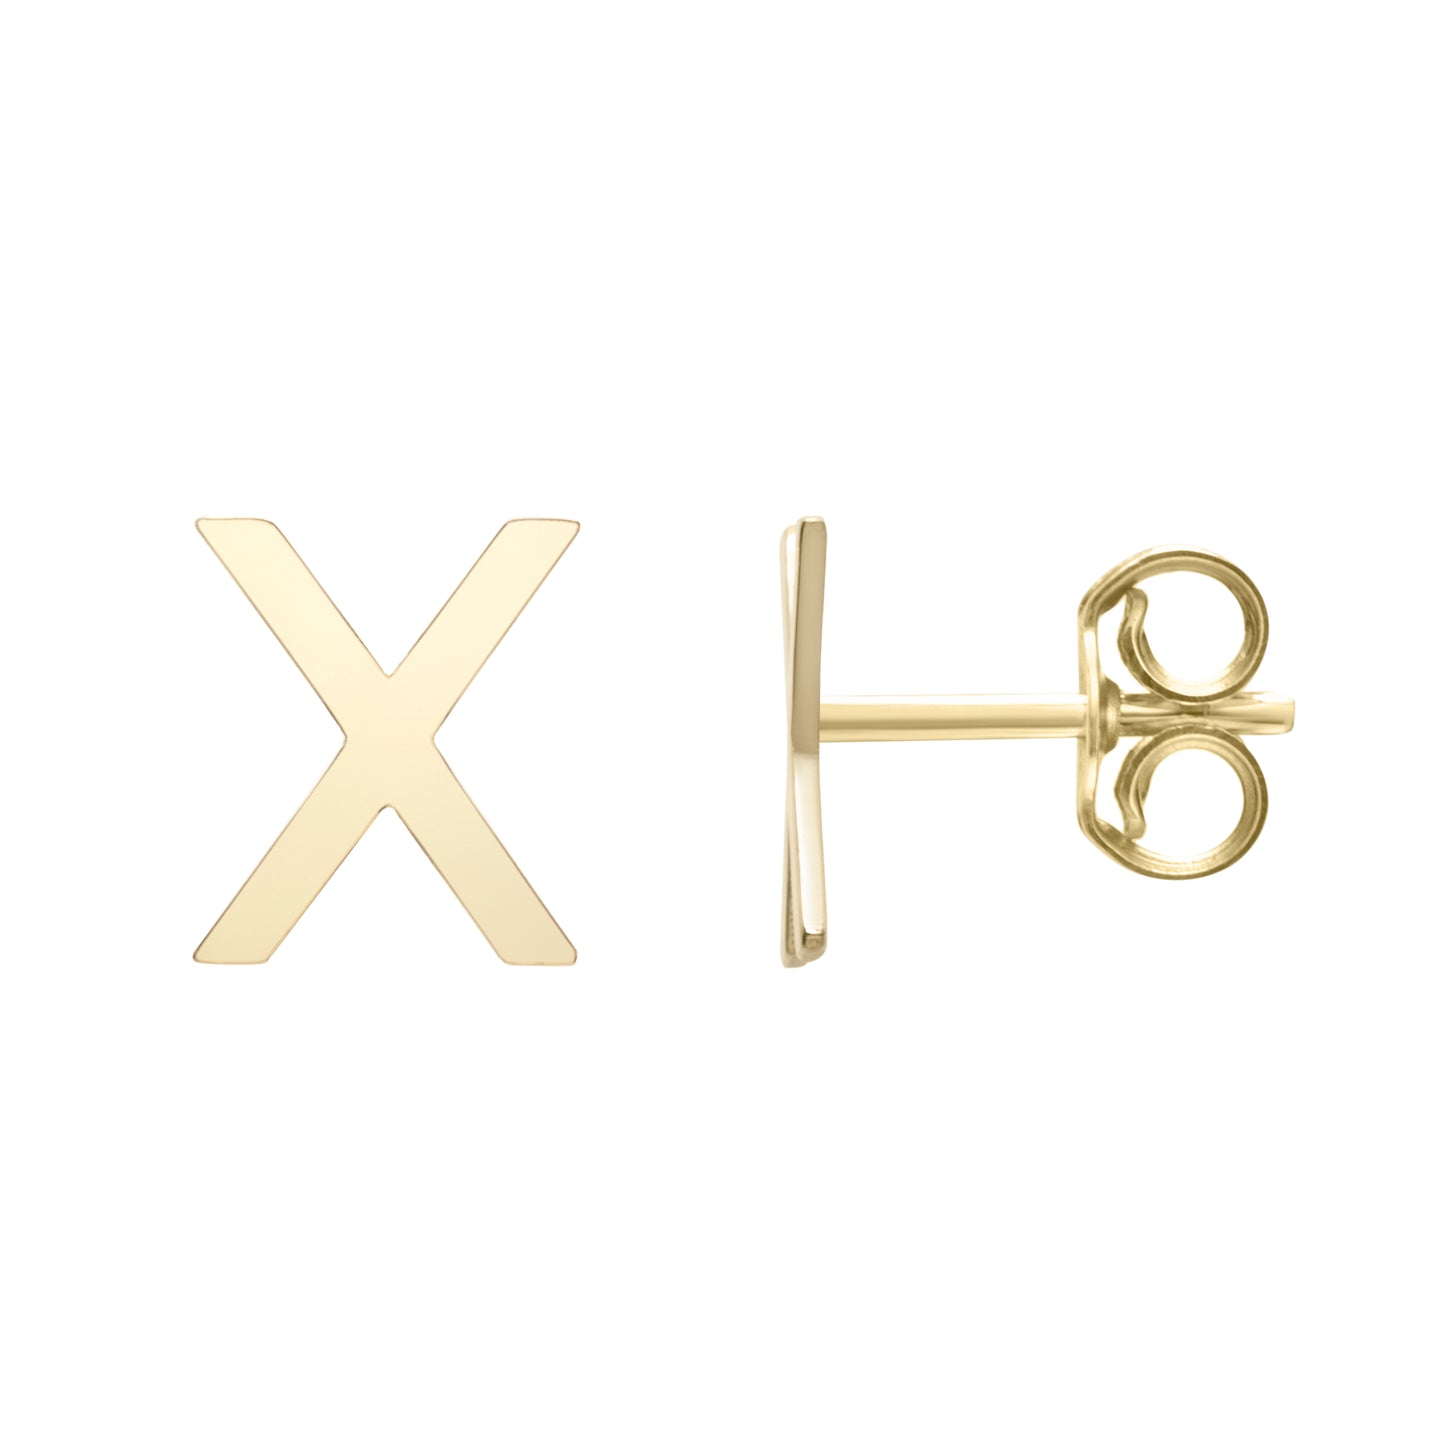 Polished 14K Gold Yours Truly Initial Stud Earring | 6.4mm